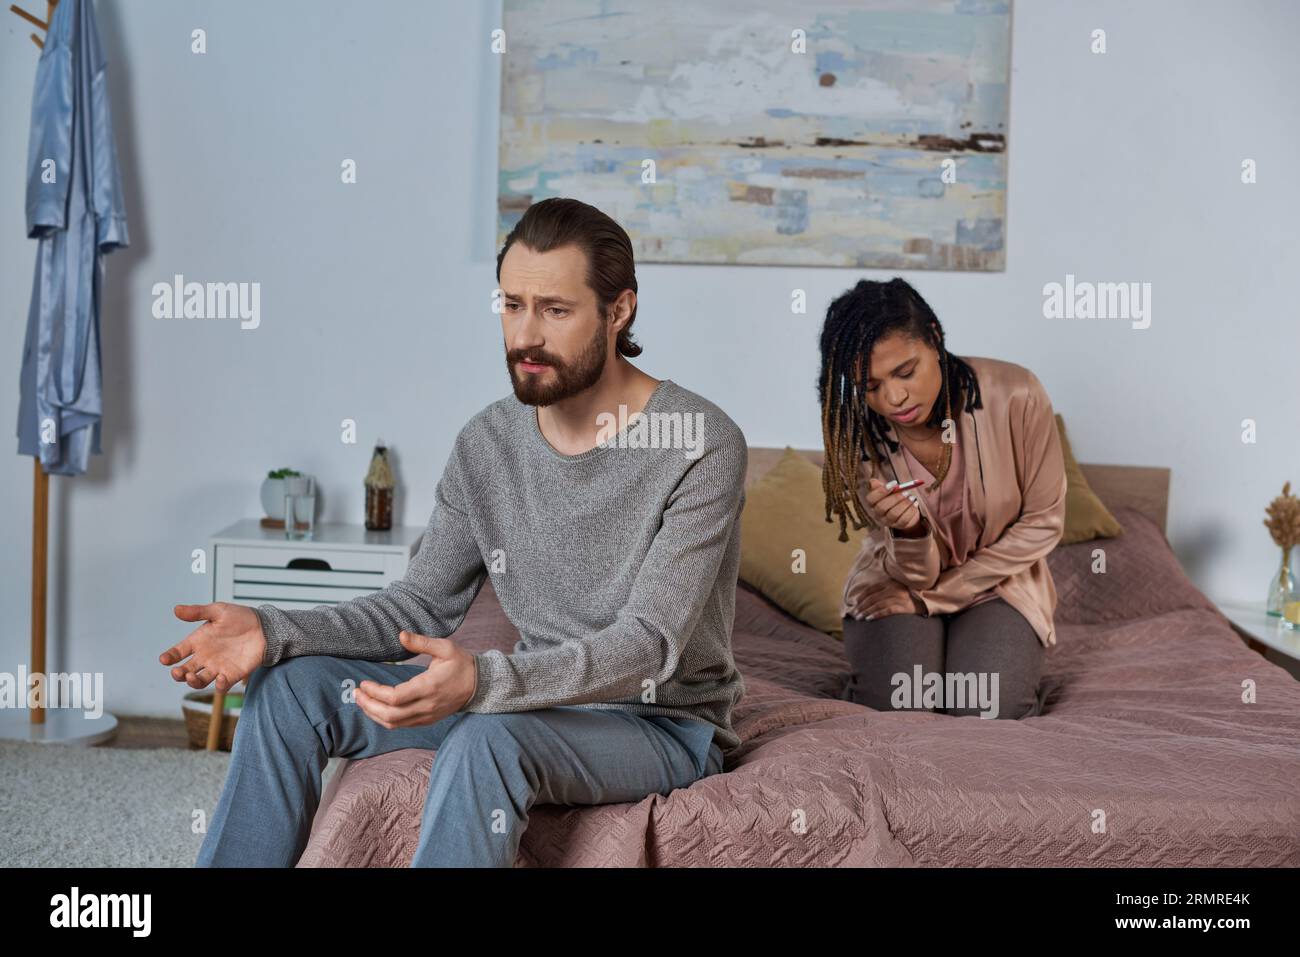 couple making decision, African american woman with pregnancy test, abortion concept, bedroom, talk Stock Photo